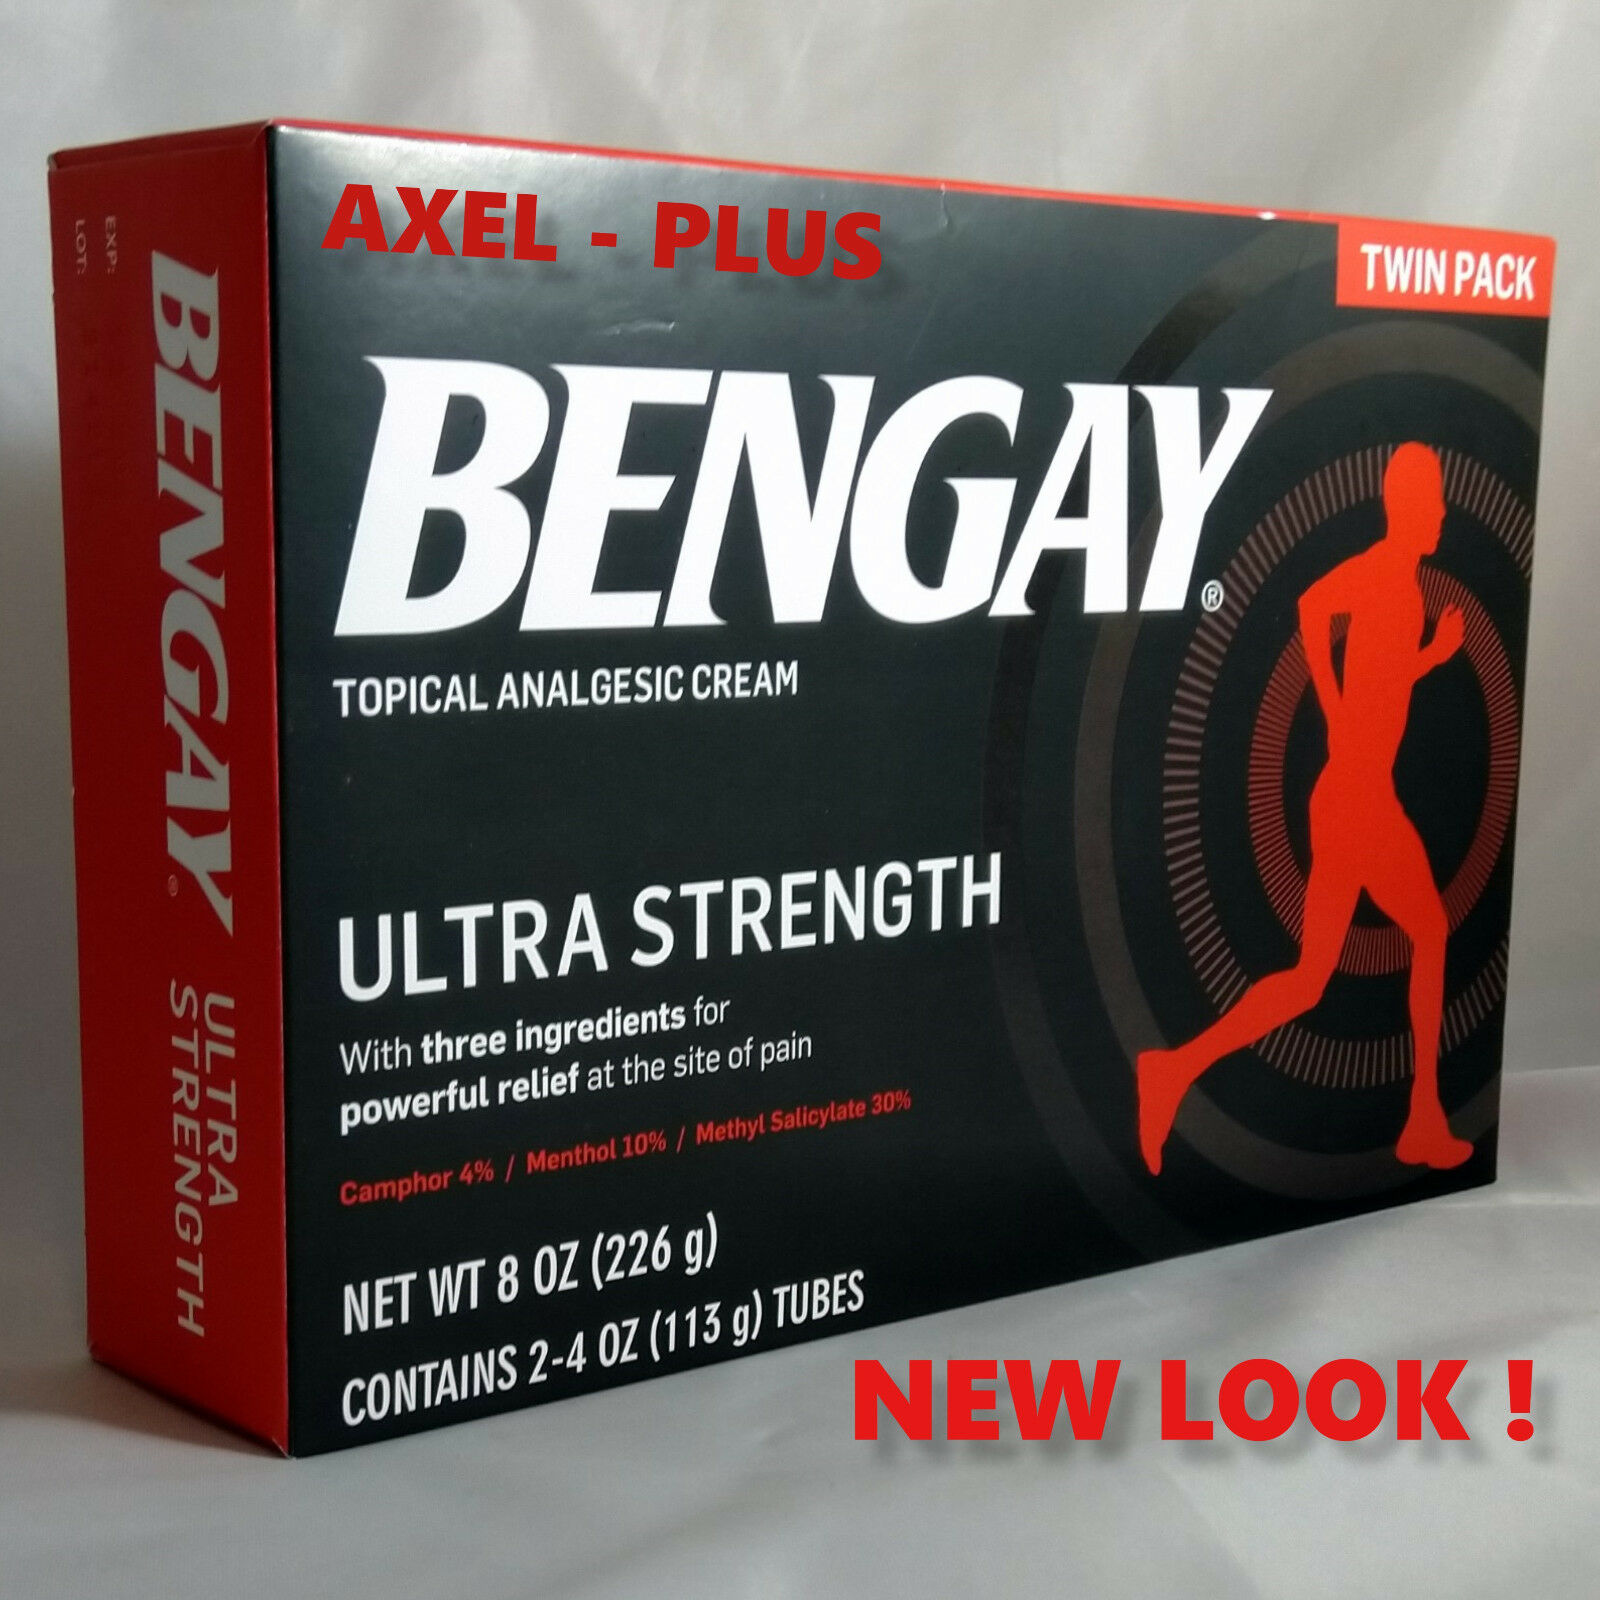 Bengay Ultra Strength Pain Relieving Cream Contains  2 X 4  Oz Tubes. New!